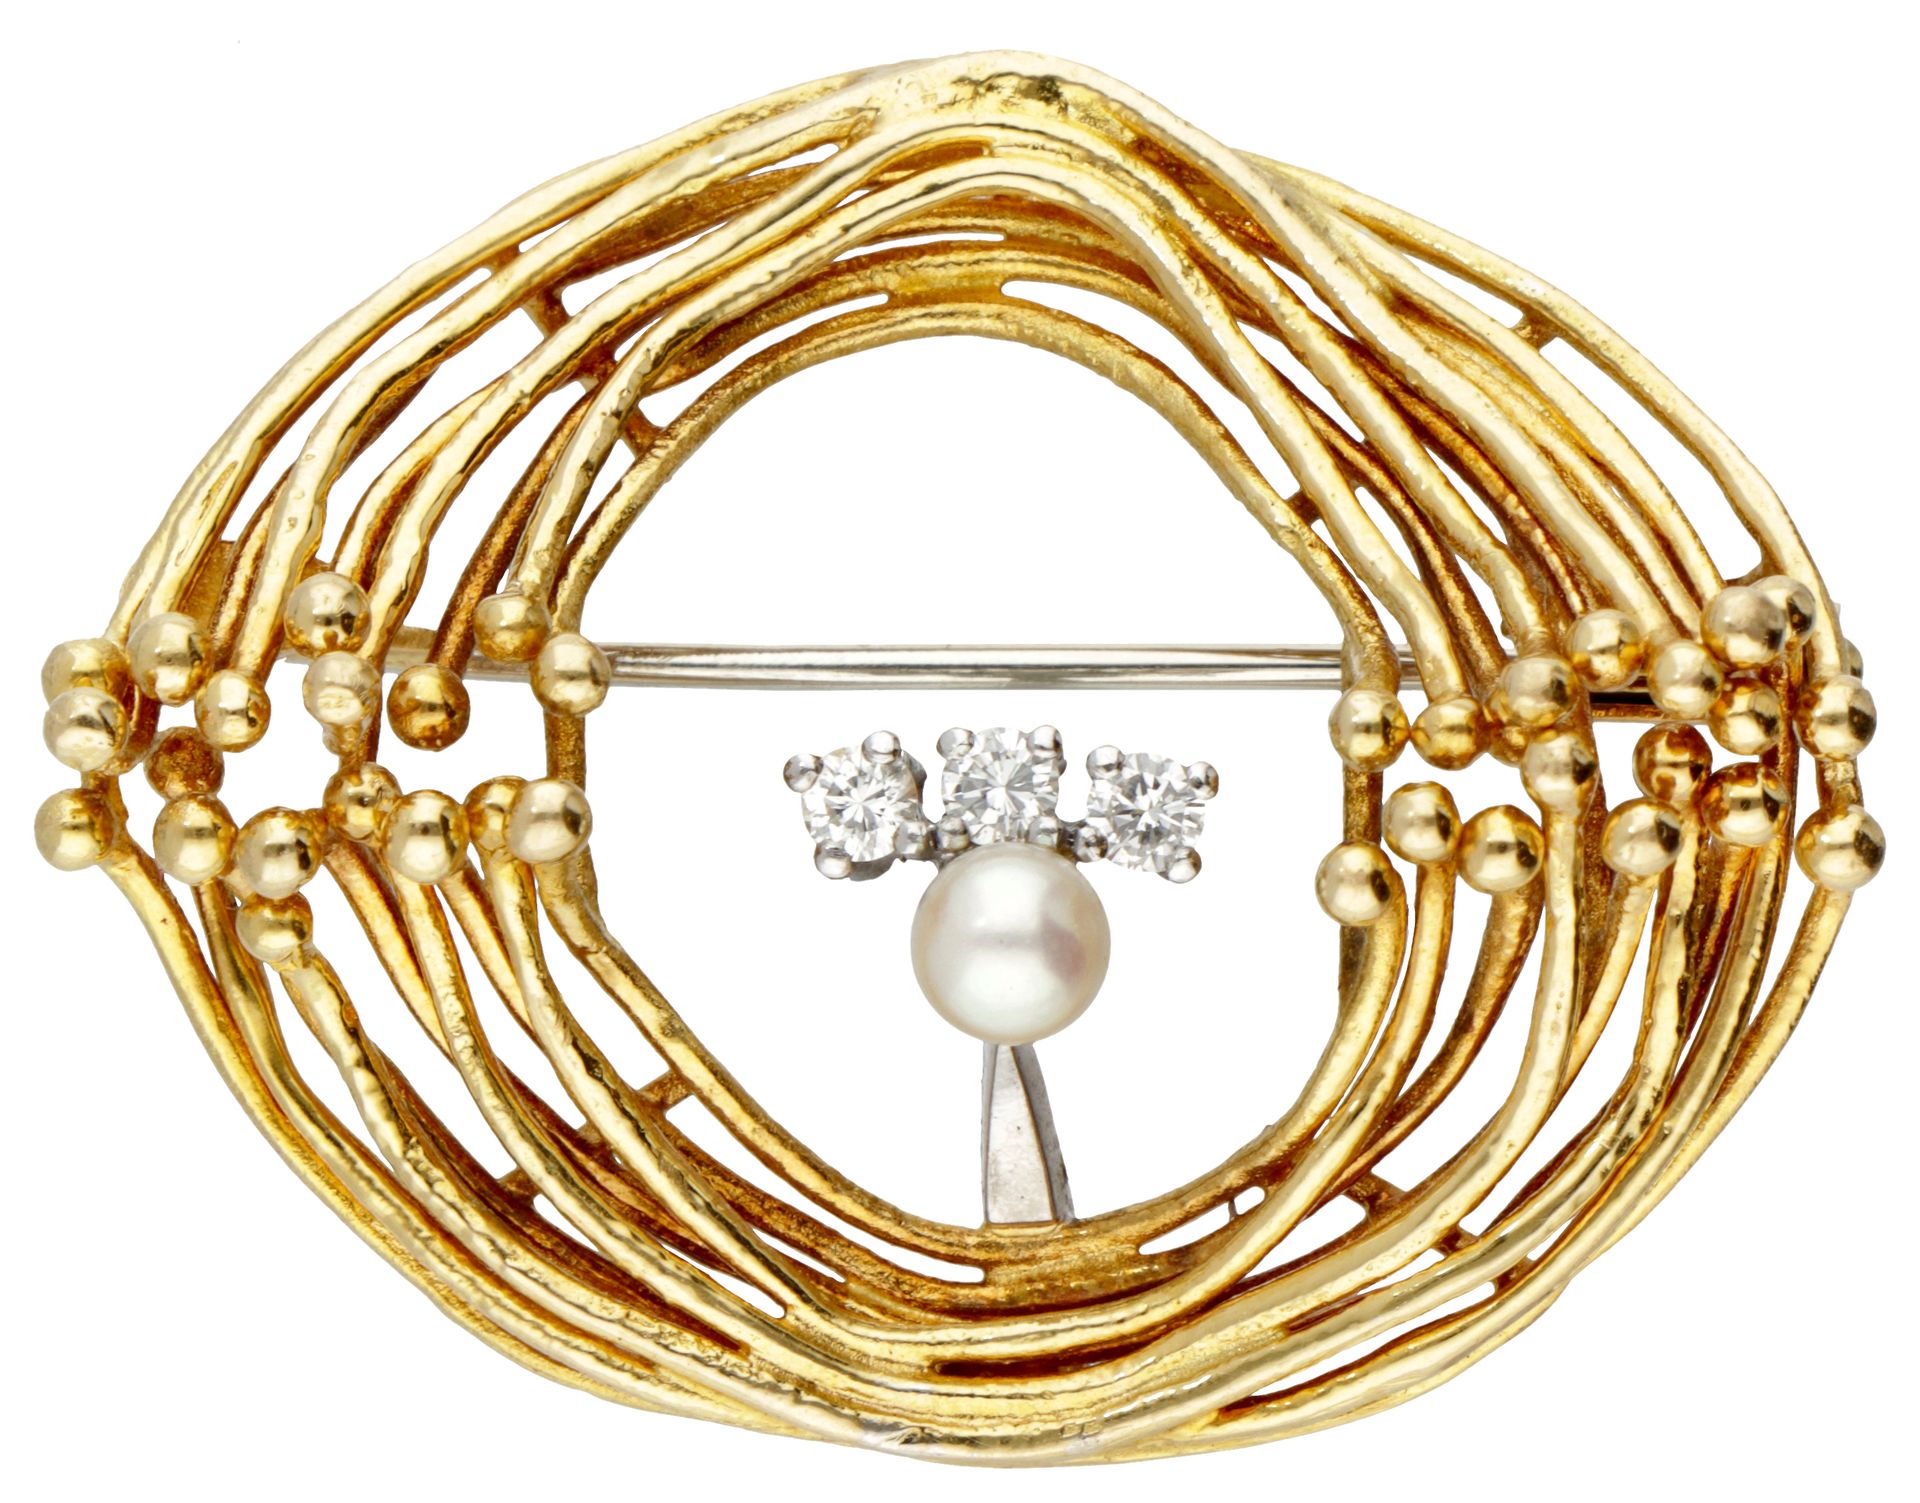 18K. Yellow gold brooch set with approx. 0.15 ct. Diamond and a pearl. 印章：750。镶有&hellip;